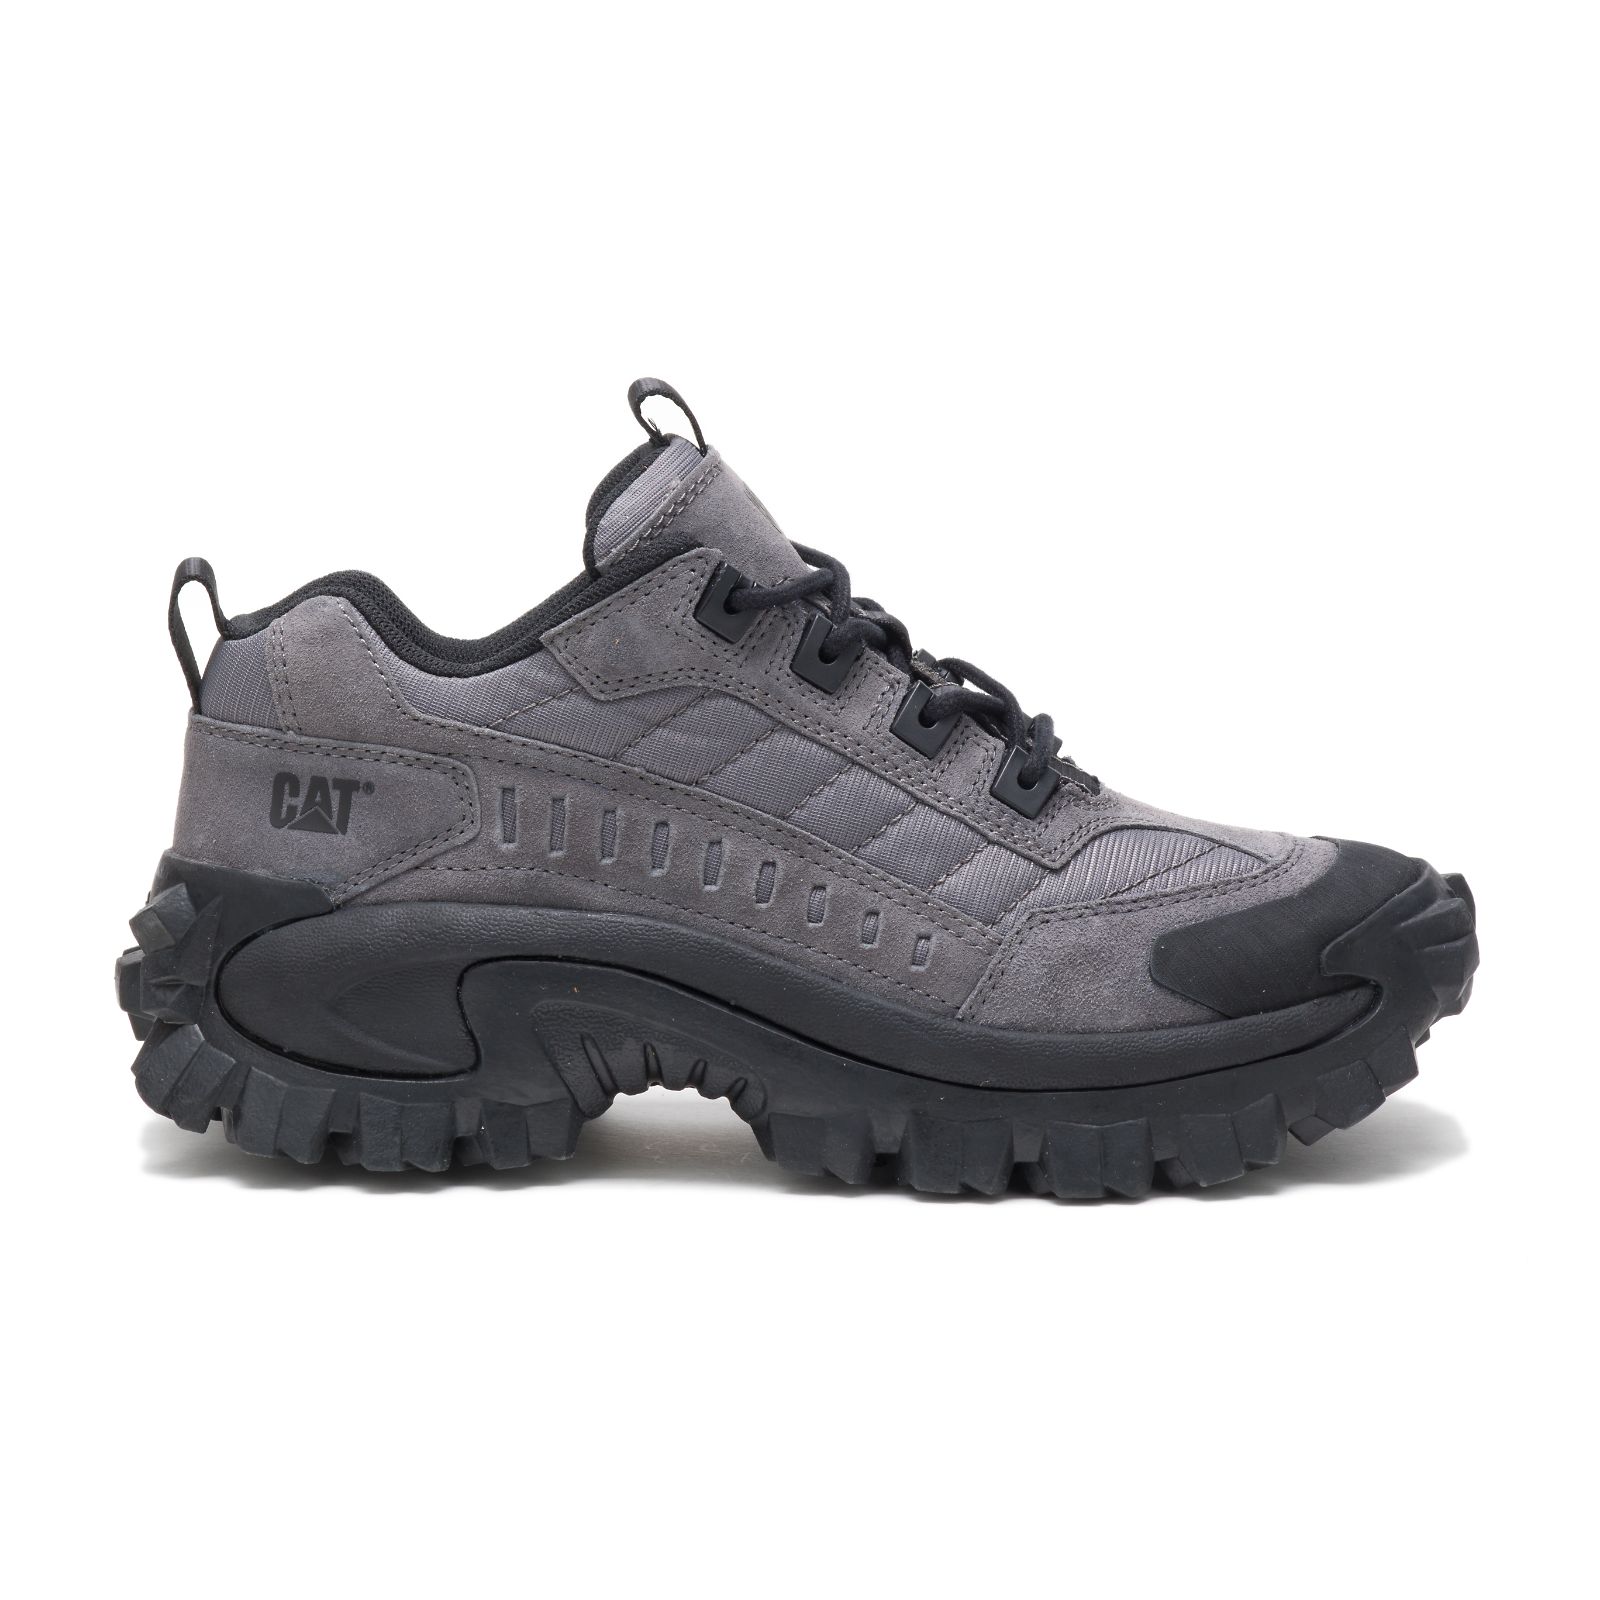 Caterpillar Intruder Philippines - Mens Casual Shoes - deep grey/Black 31604XFRY